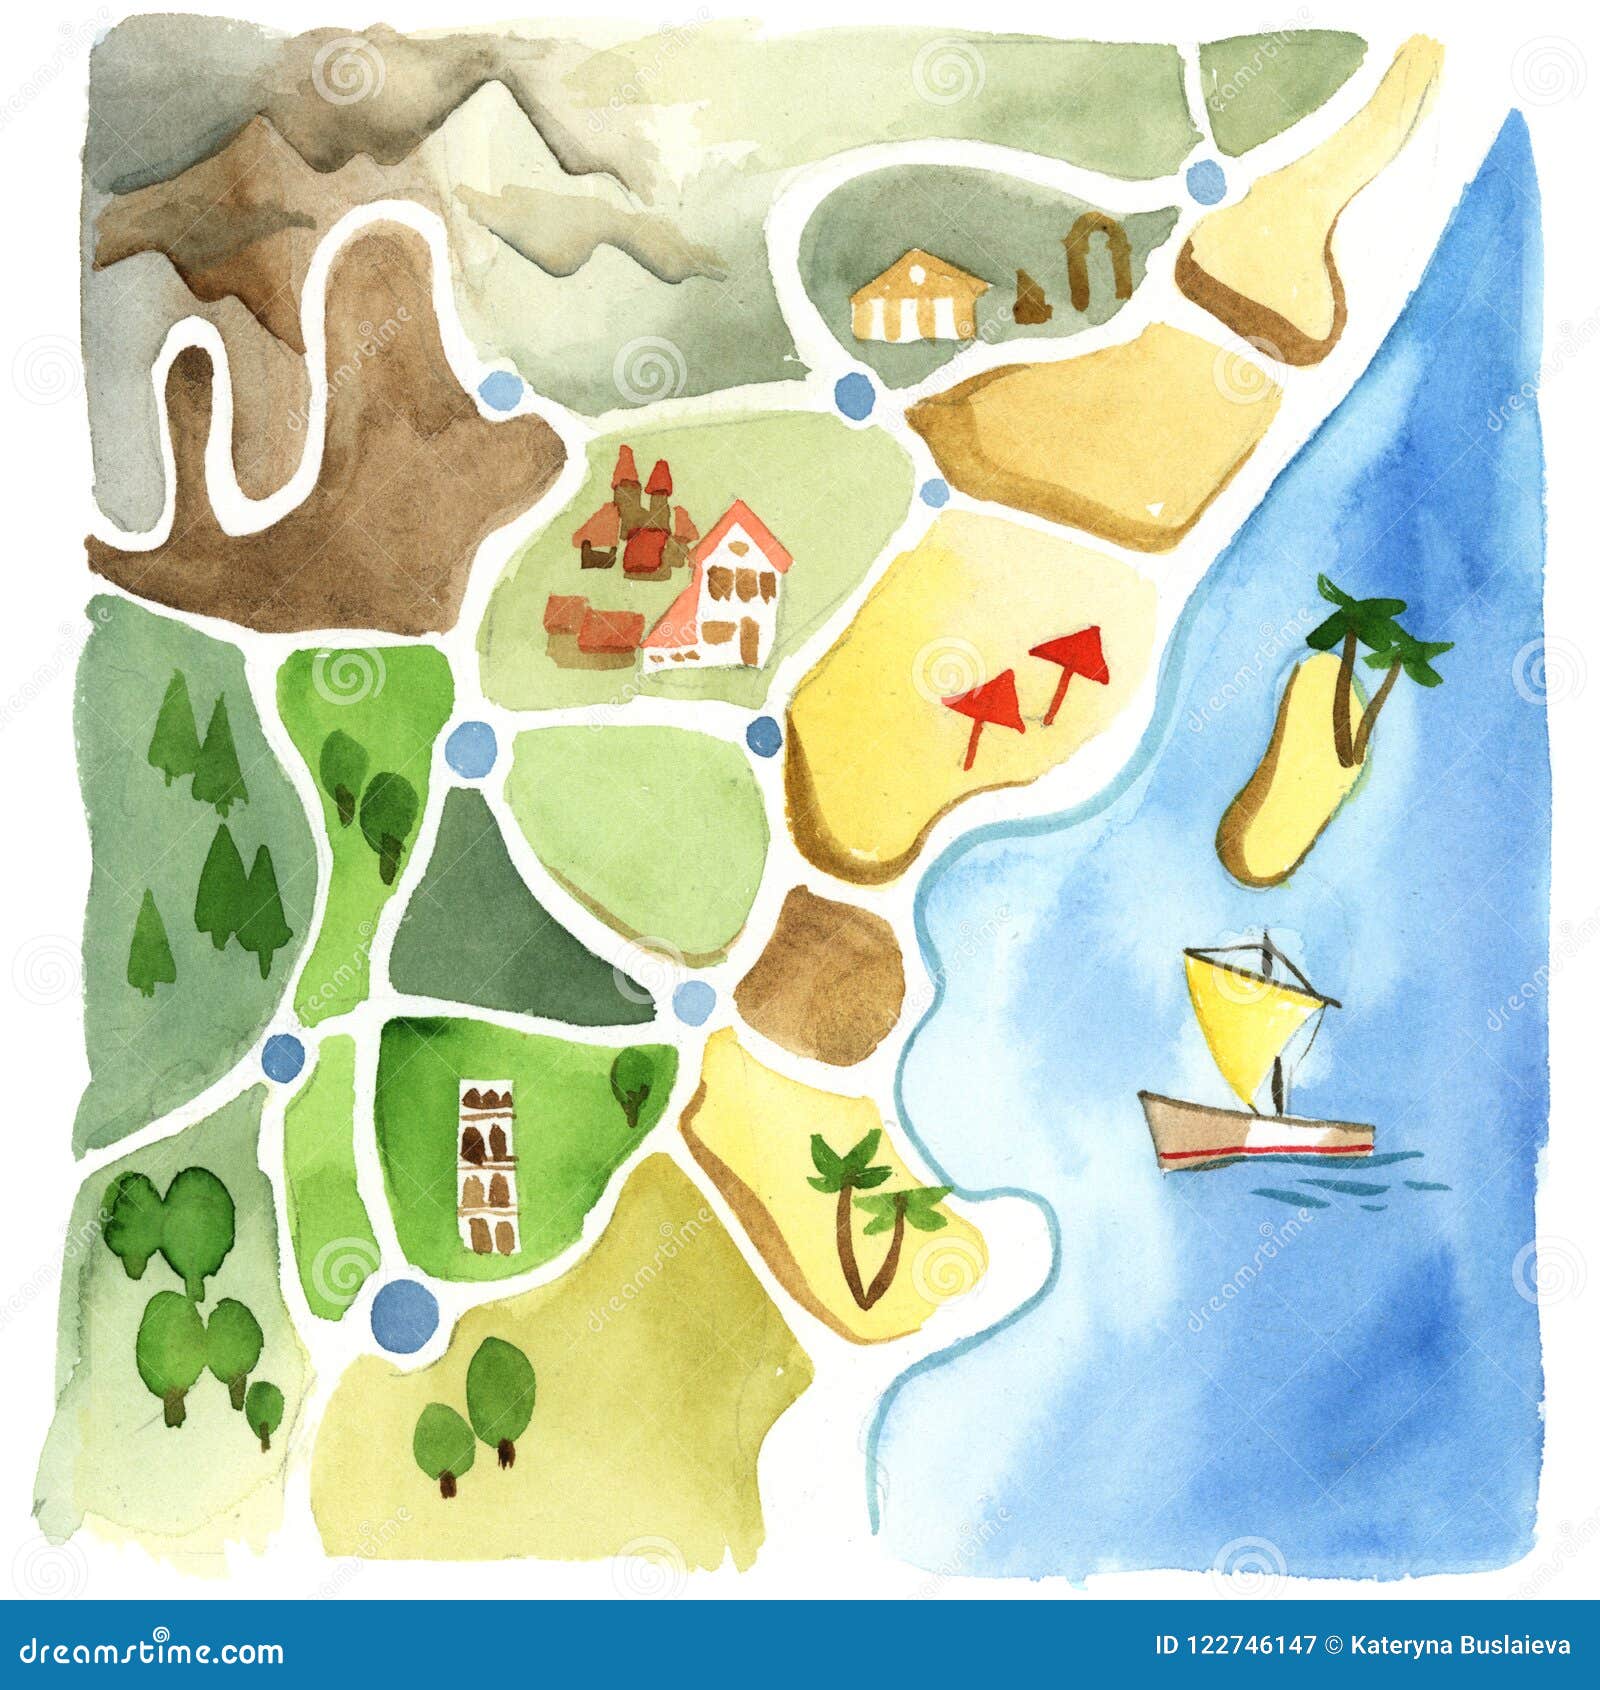 the colorful map of the unnamed city with the beach and seaside